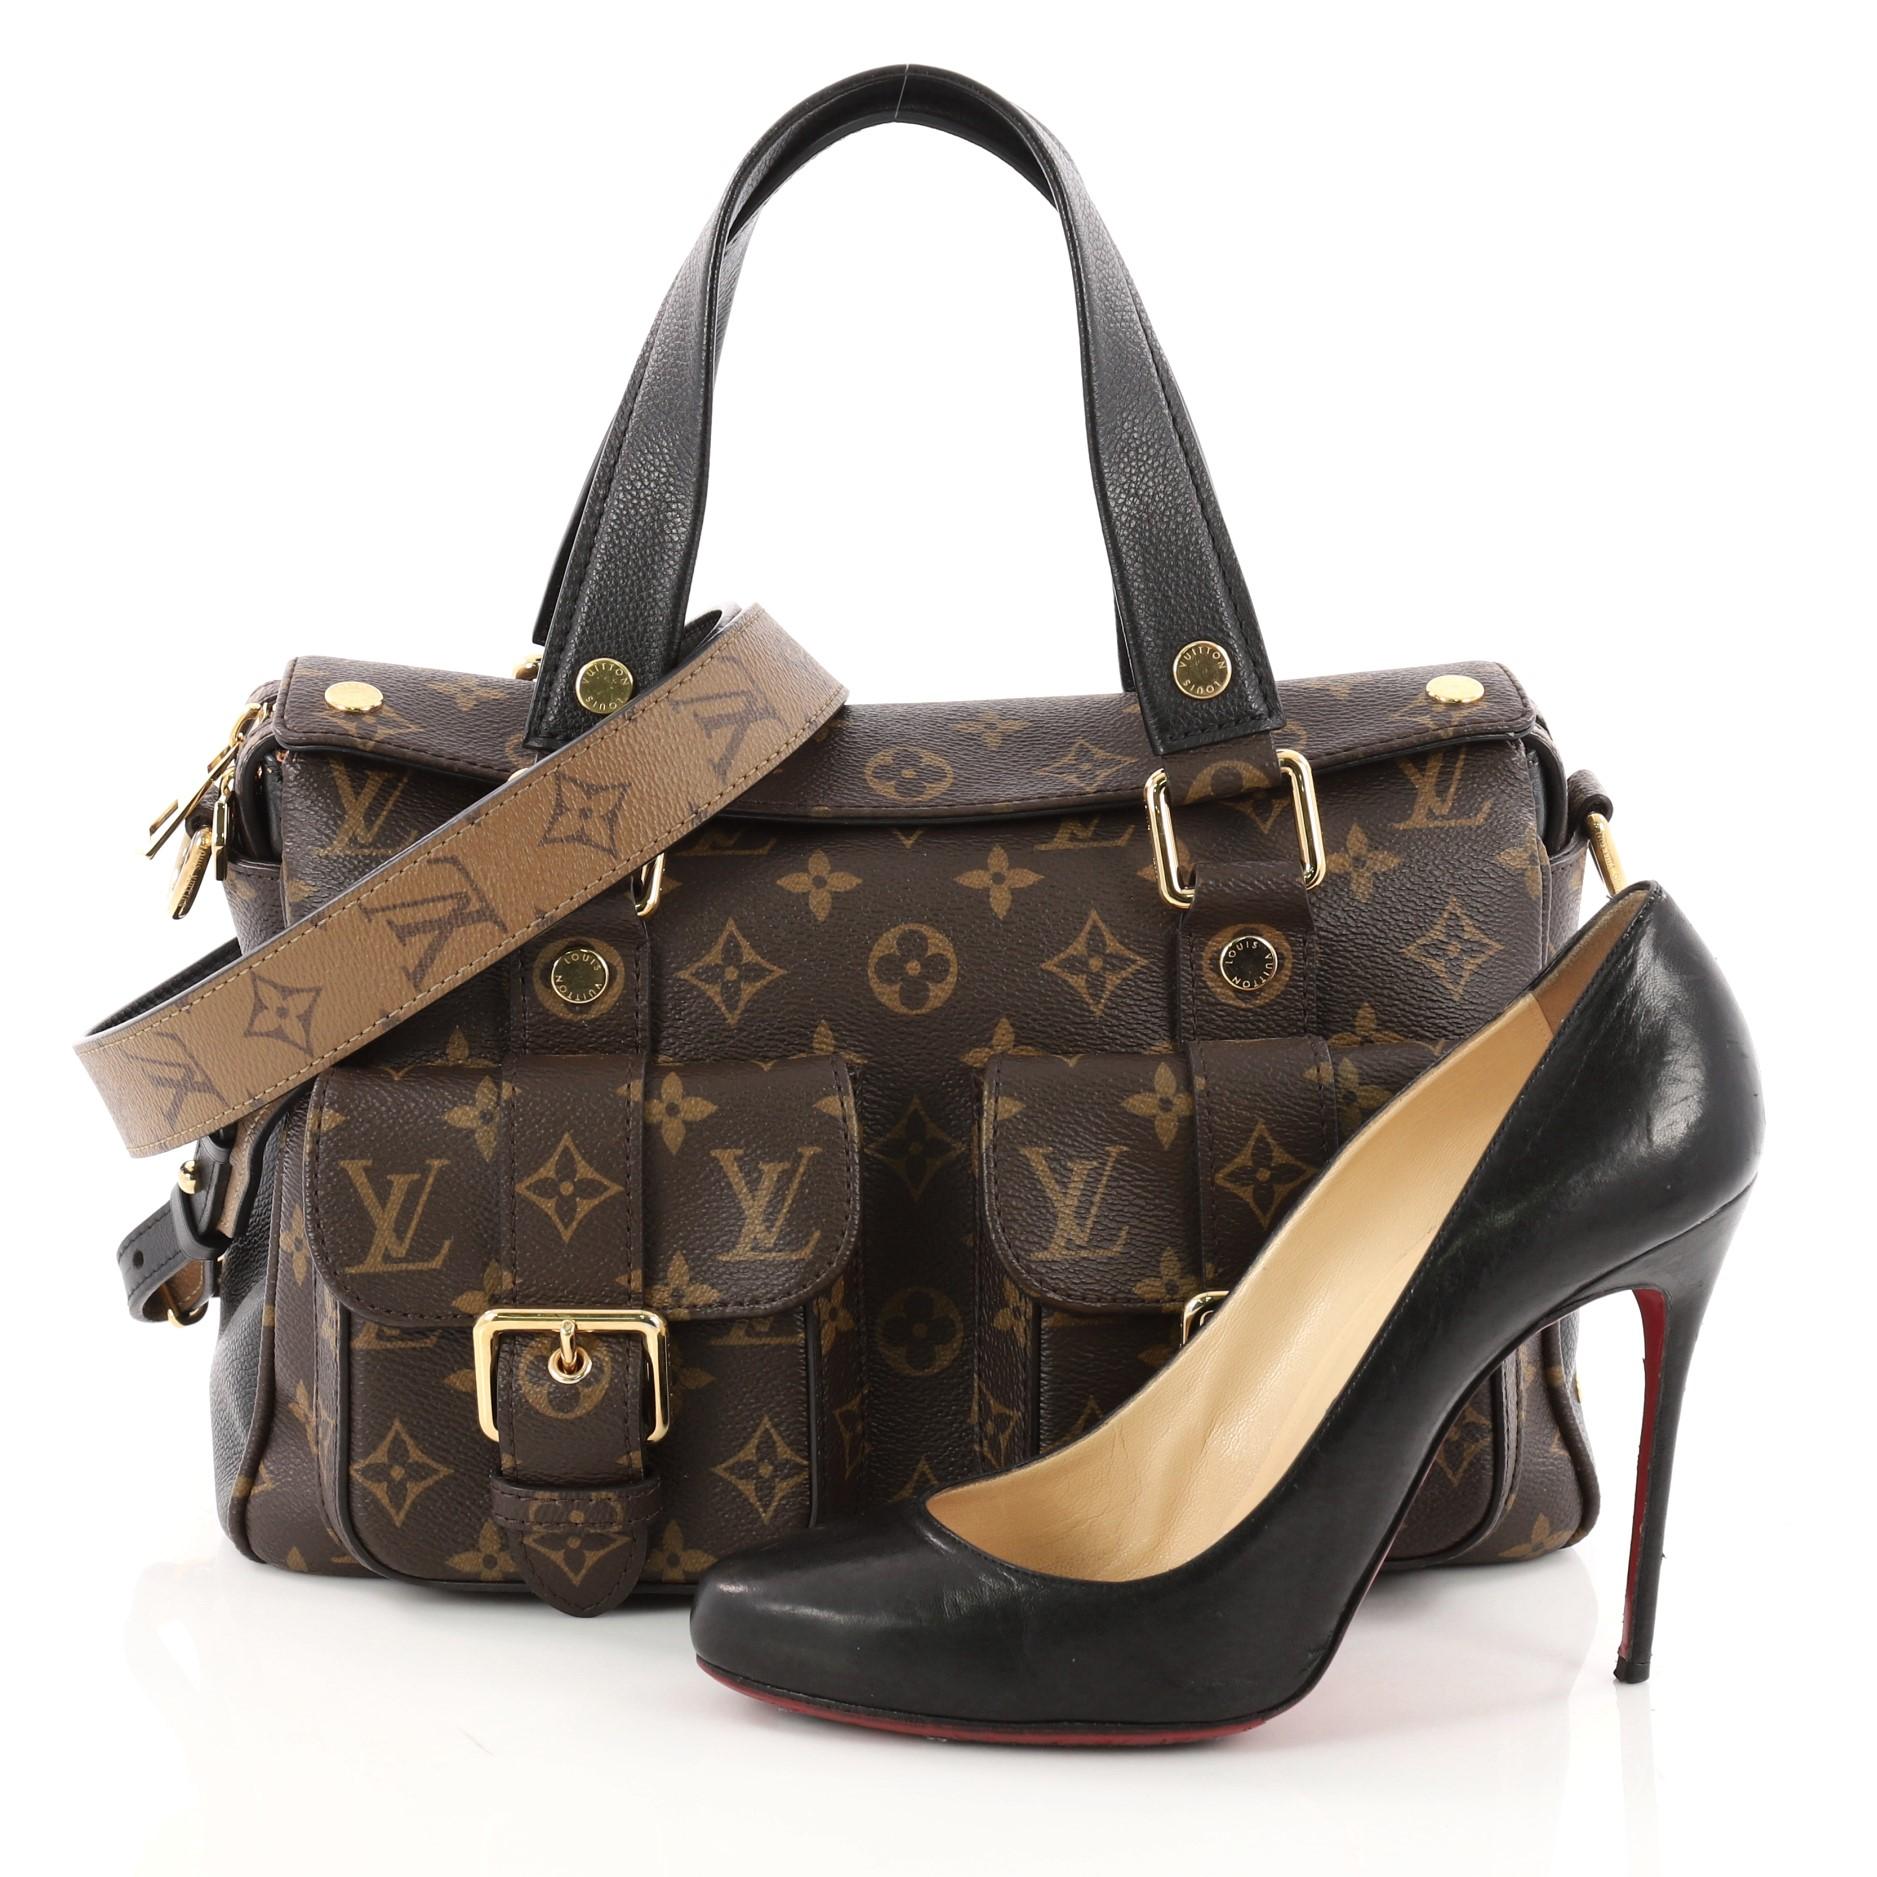 This authentic Louis Vuitton Manhattan NM Handbag Monogram Canvas with Leather brings a fresh spirit to the iconic Manhattan bag. Crafted in brown monogram coated canvas with black leather, this bag features dual flat black leather handles, two